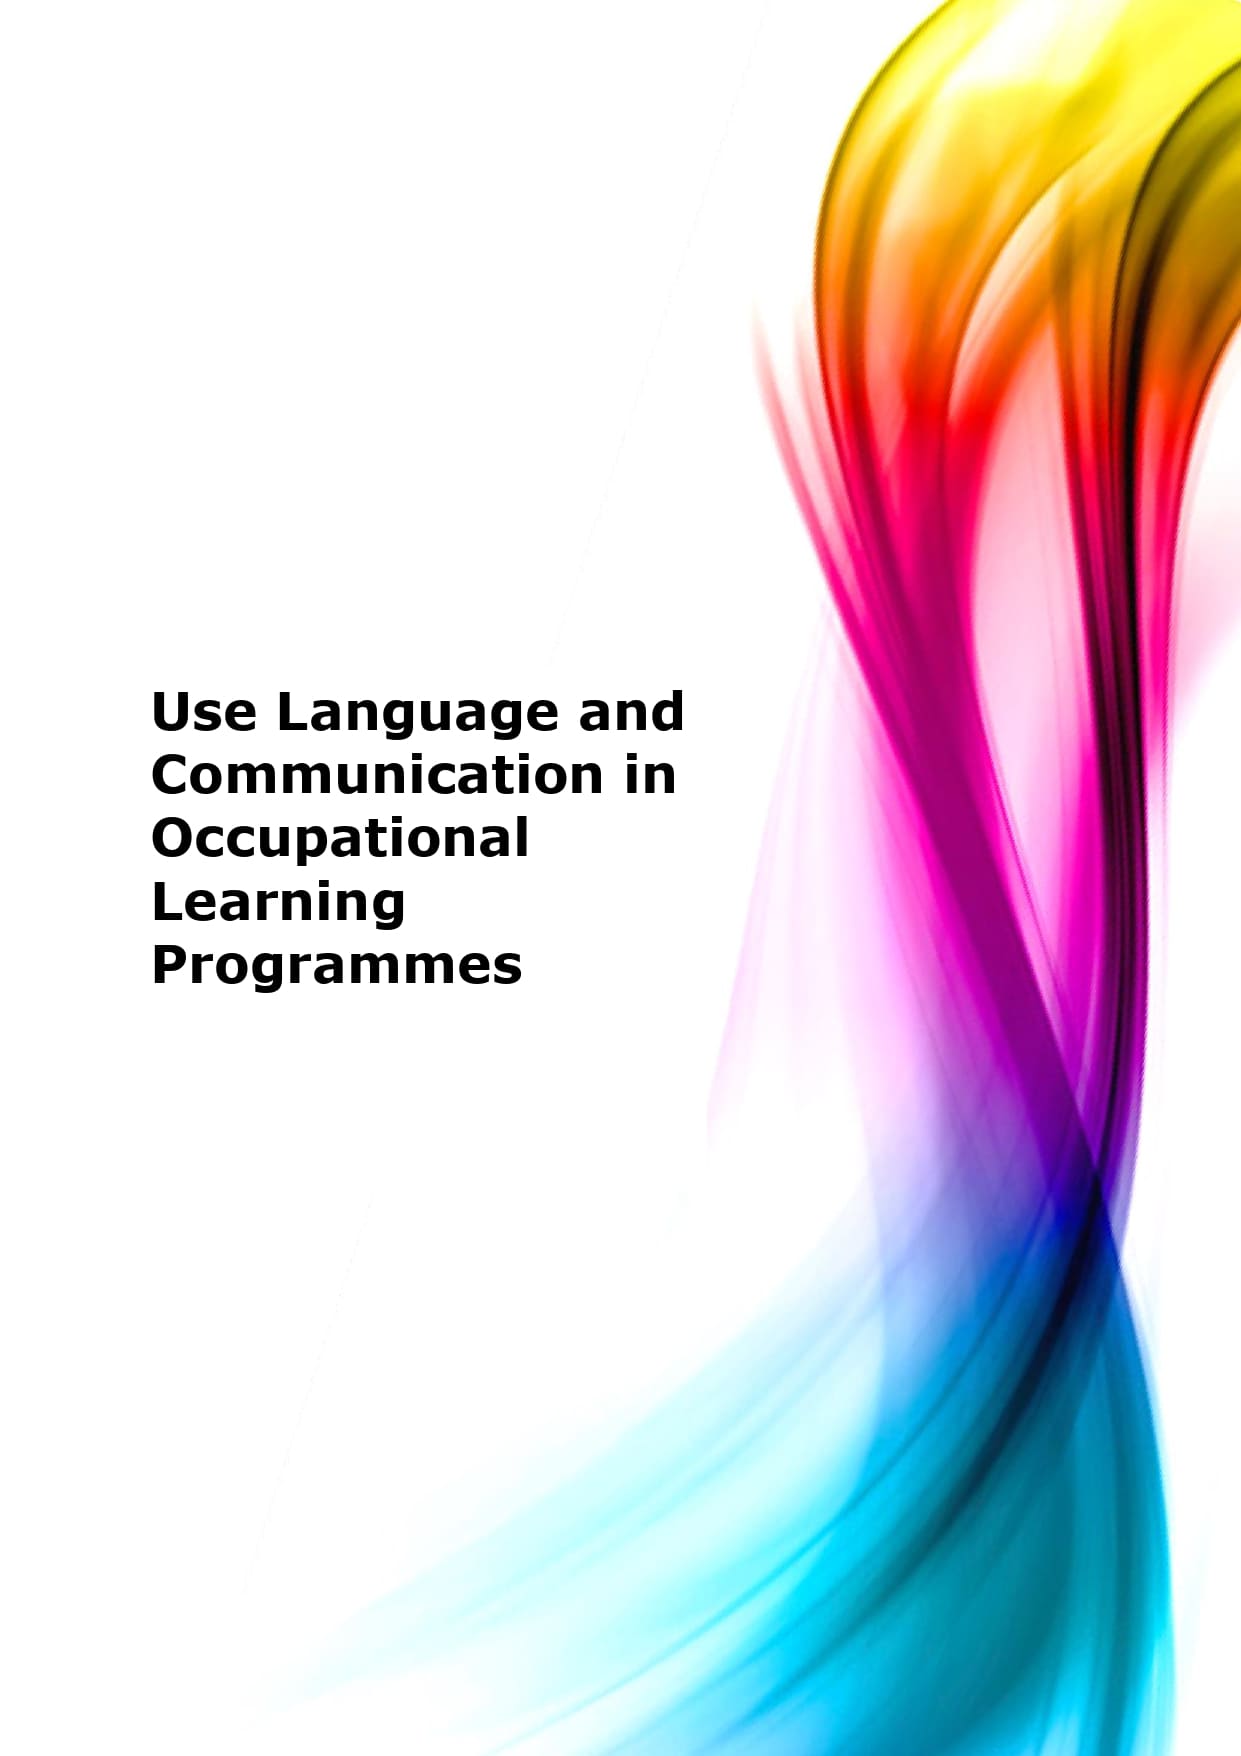 Use language and communication in occupational learning programmes